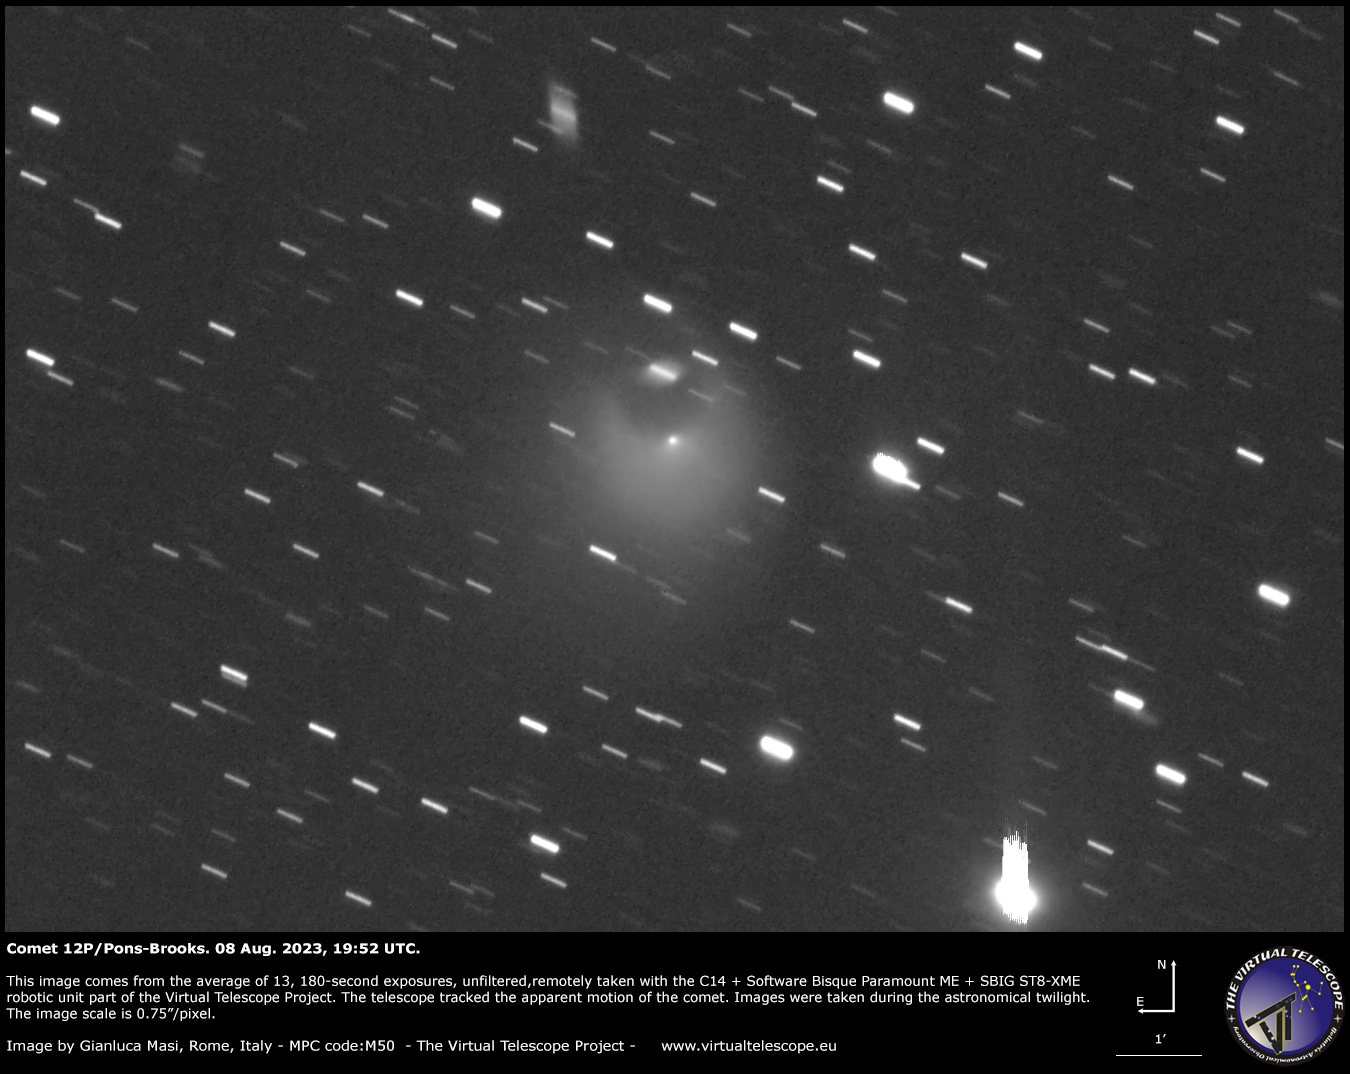 Comet 12P/Pons-Brooks in outburst: 8 Aug. 2023.